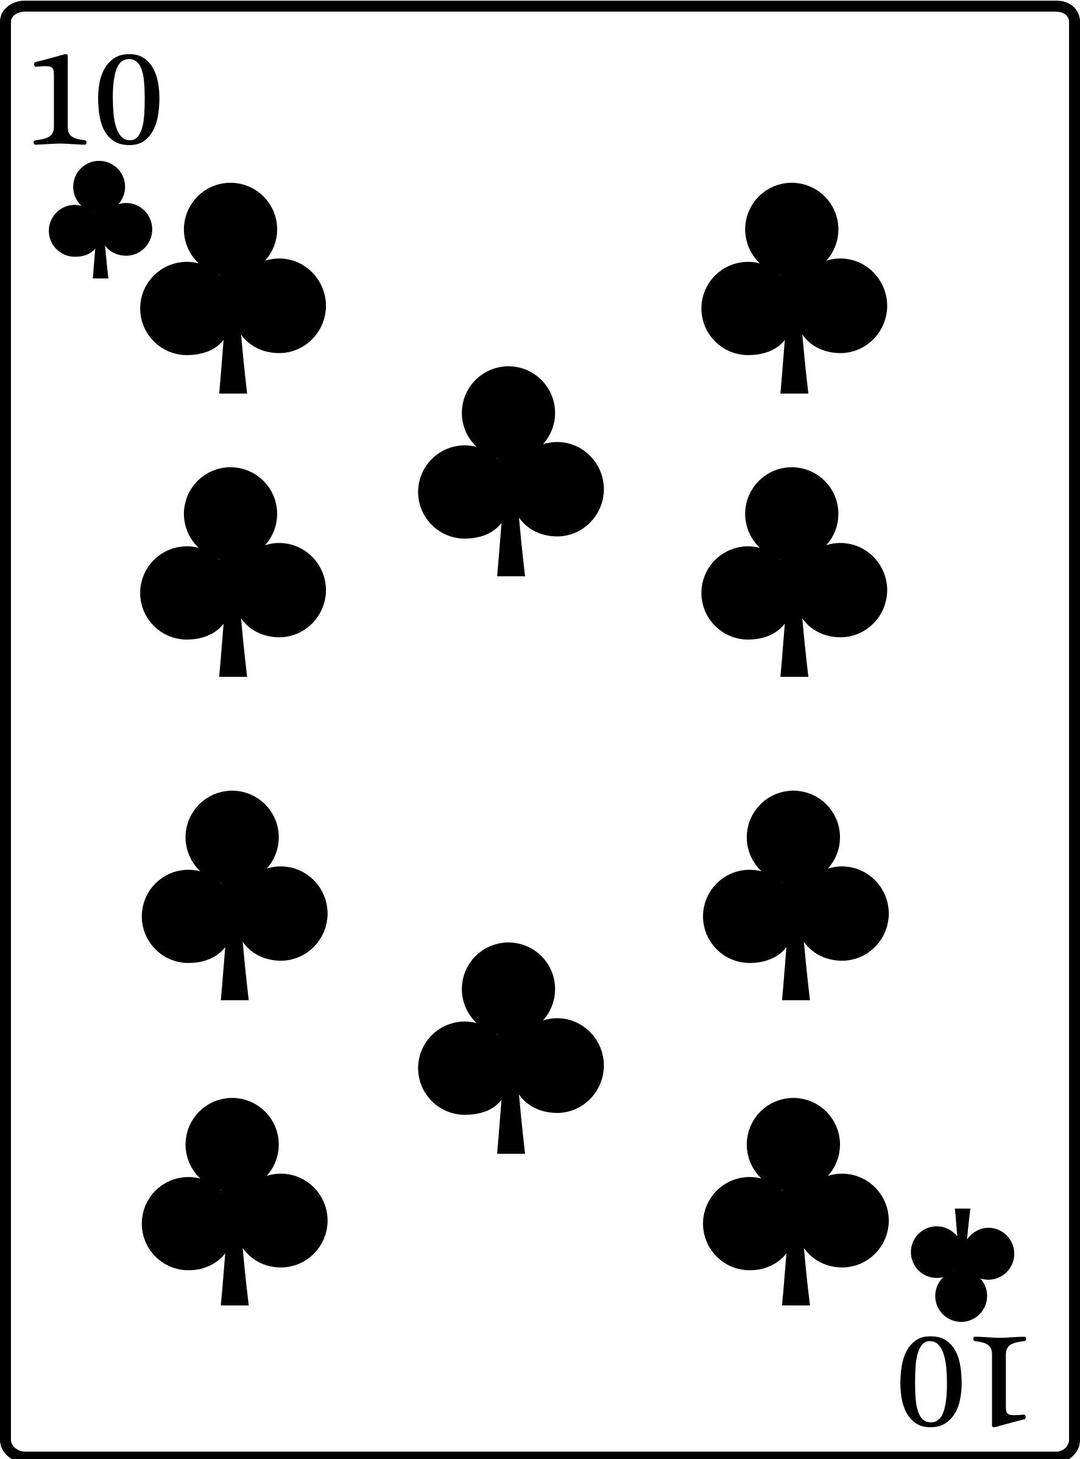 10 of Clubs png transparent